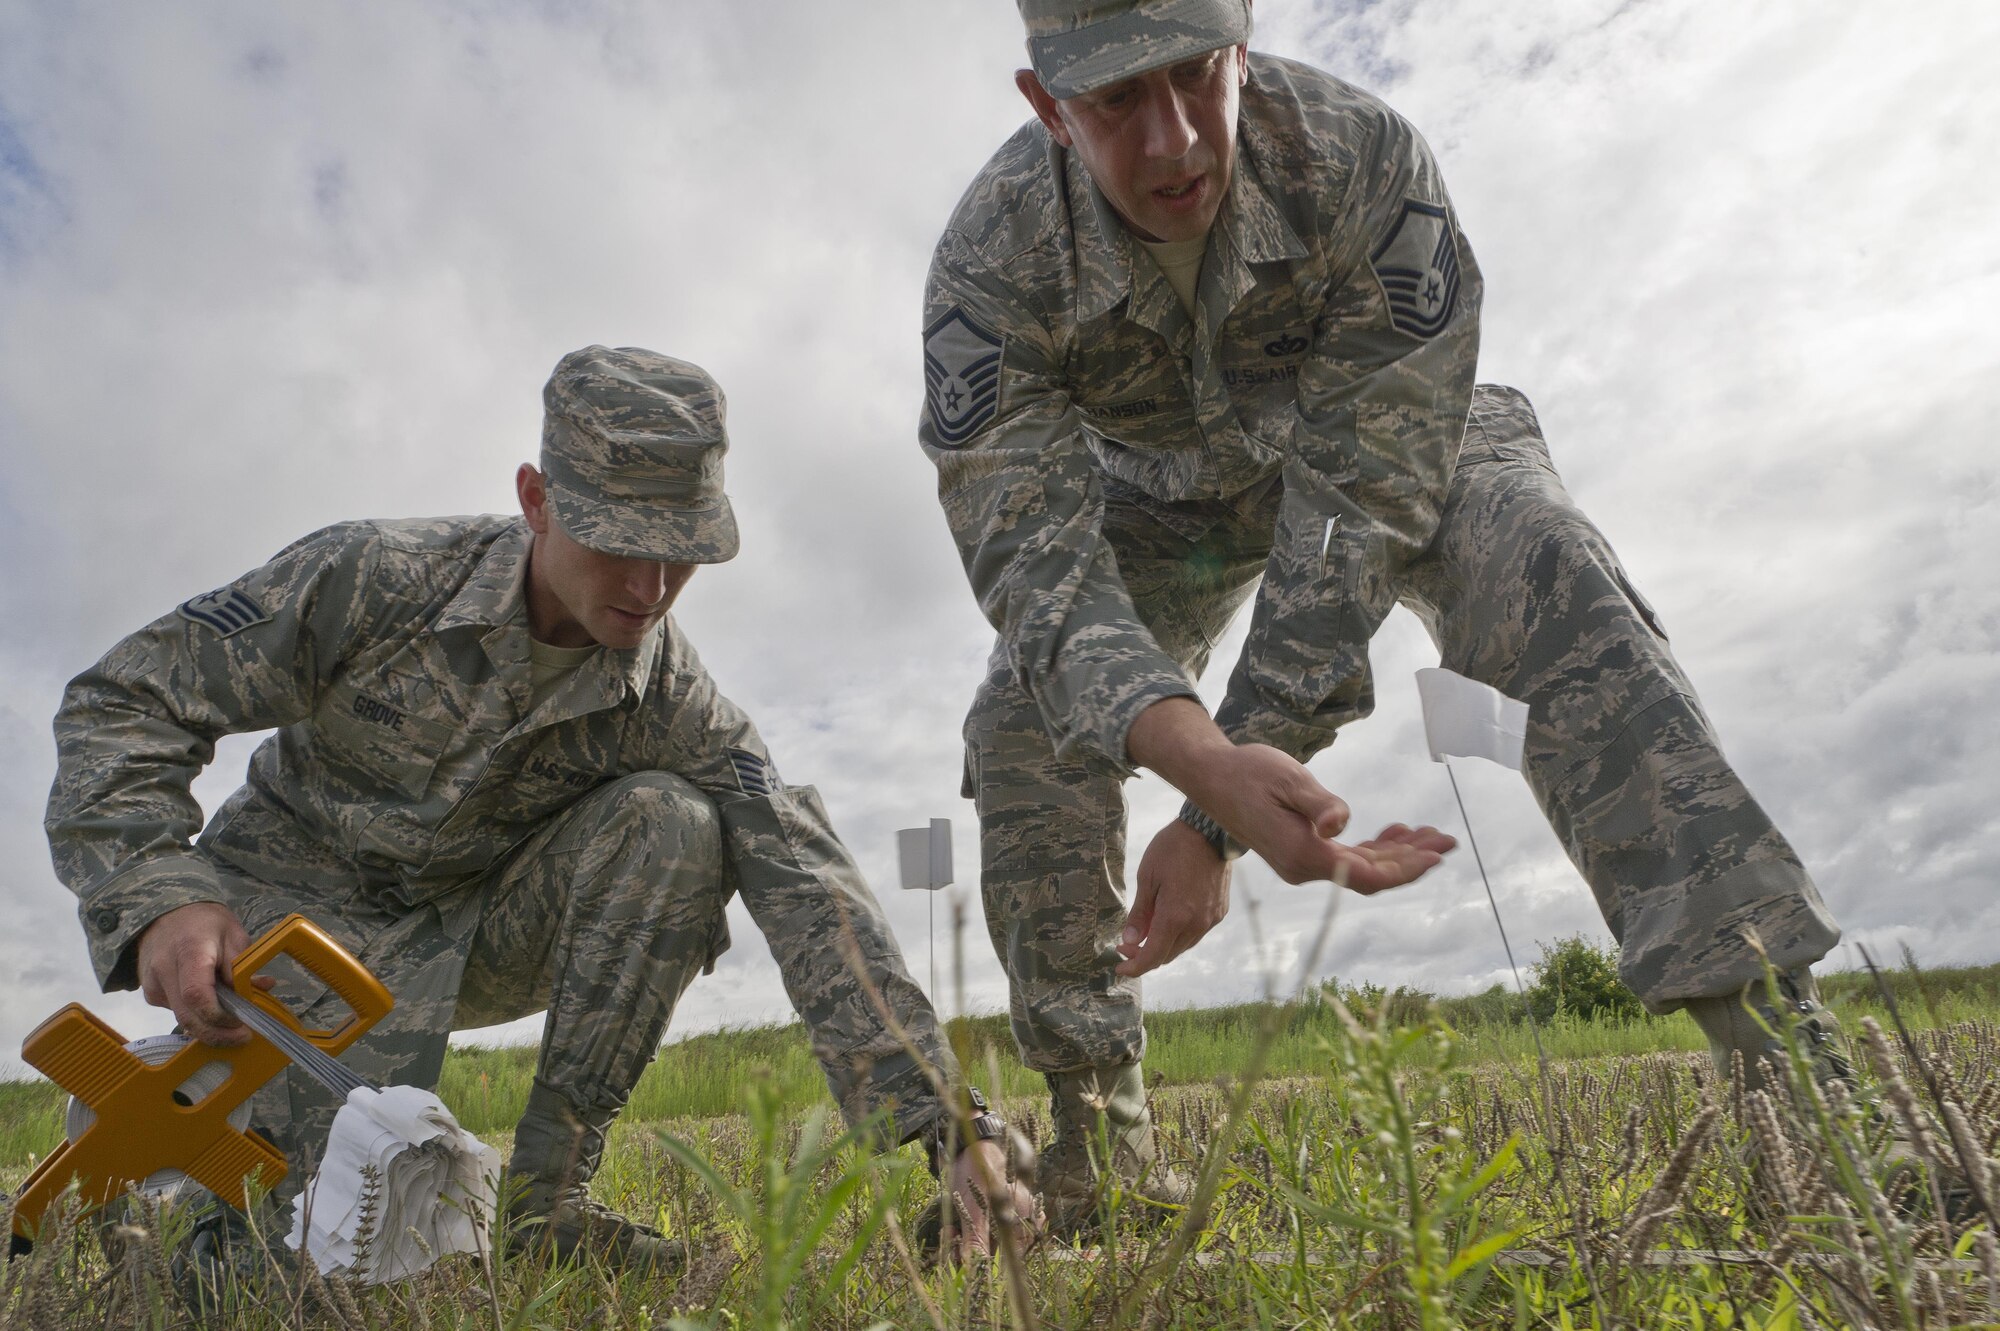 U.S. Air Force Staff Sgt. Brandon Grove, left, and Master Sgt. Jason Hanson, both assigned to the 302nd Civil Engineer Squadron, Peterson AFB, Colo., place suvey flags for a bare base setup at Young Air Assault Strip, Fort McCoy, Wis., Aug. 4, 2017, during exercise Patriot Warrior.